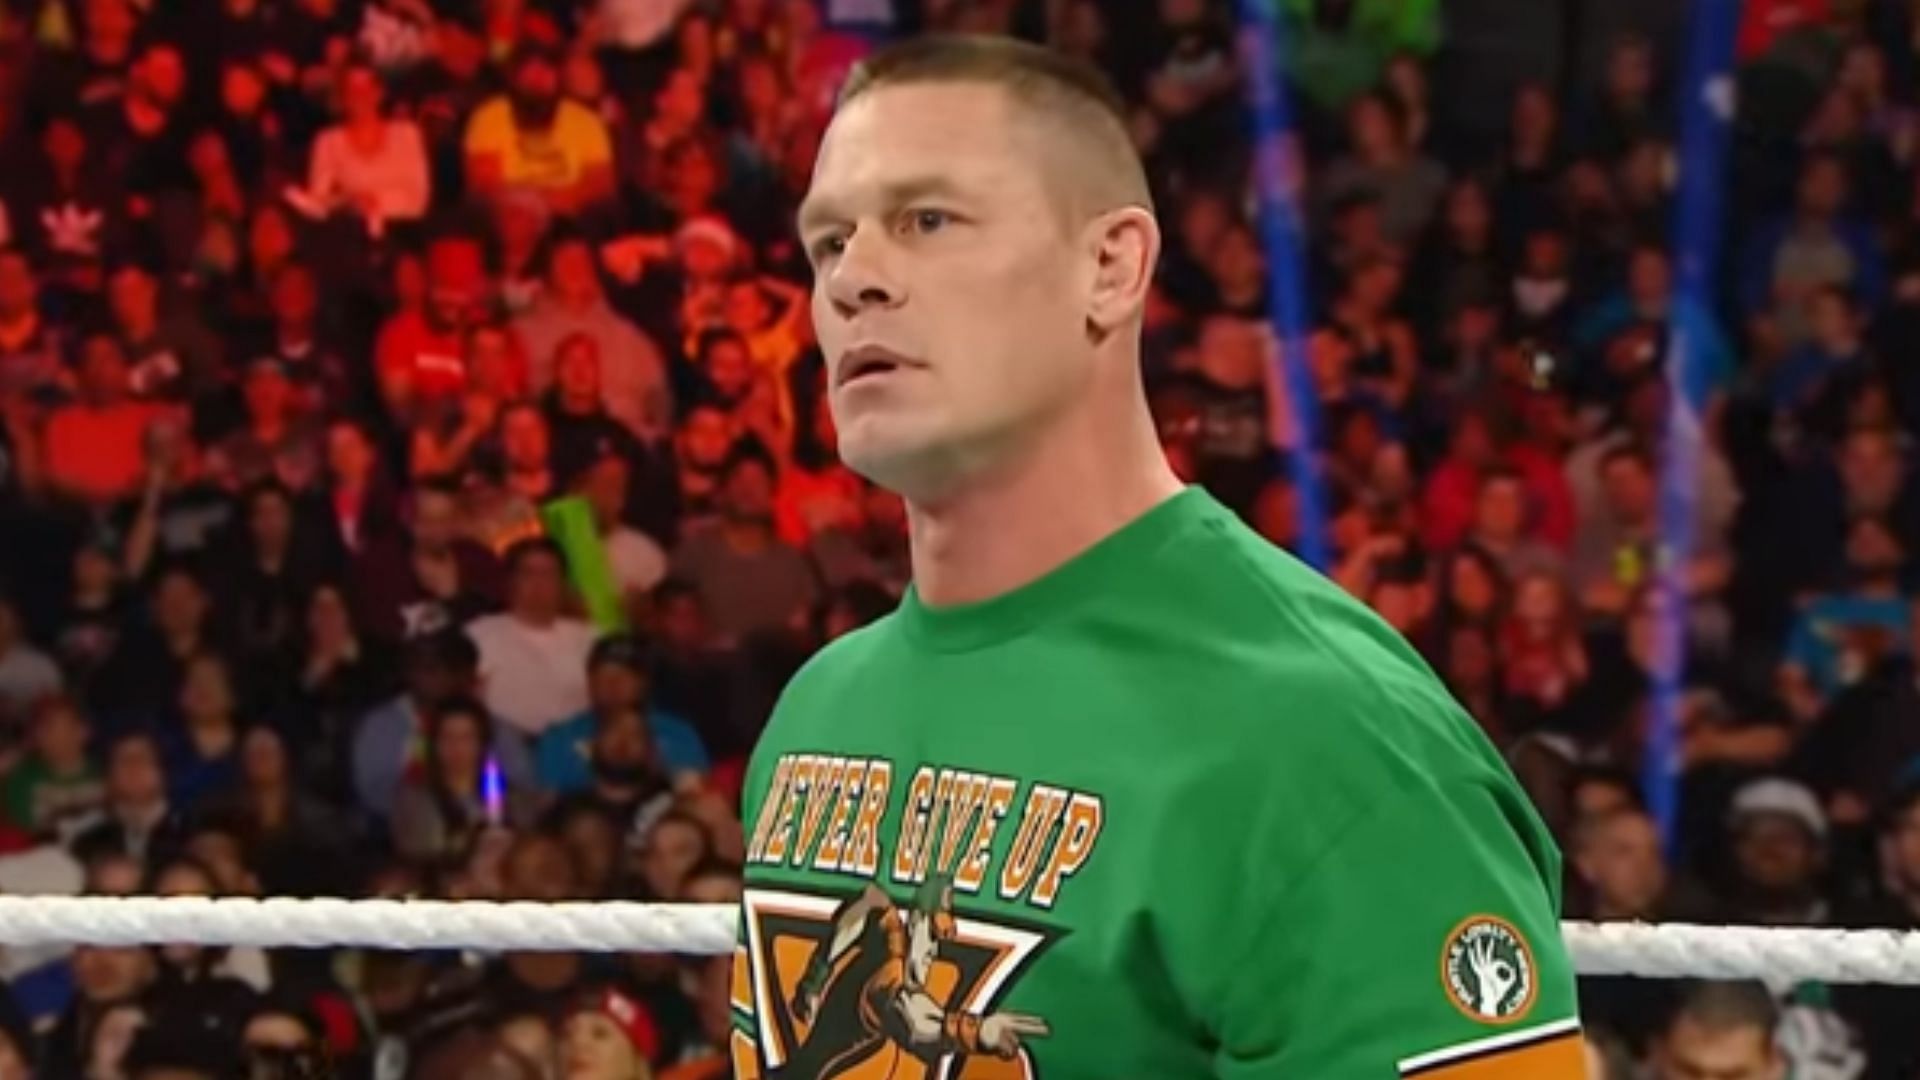 John Cena is one of WWE&rsquo;s most respected superstars.